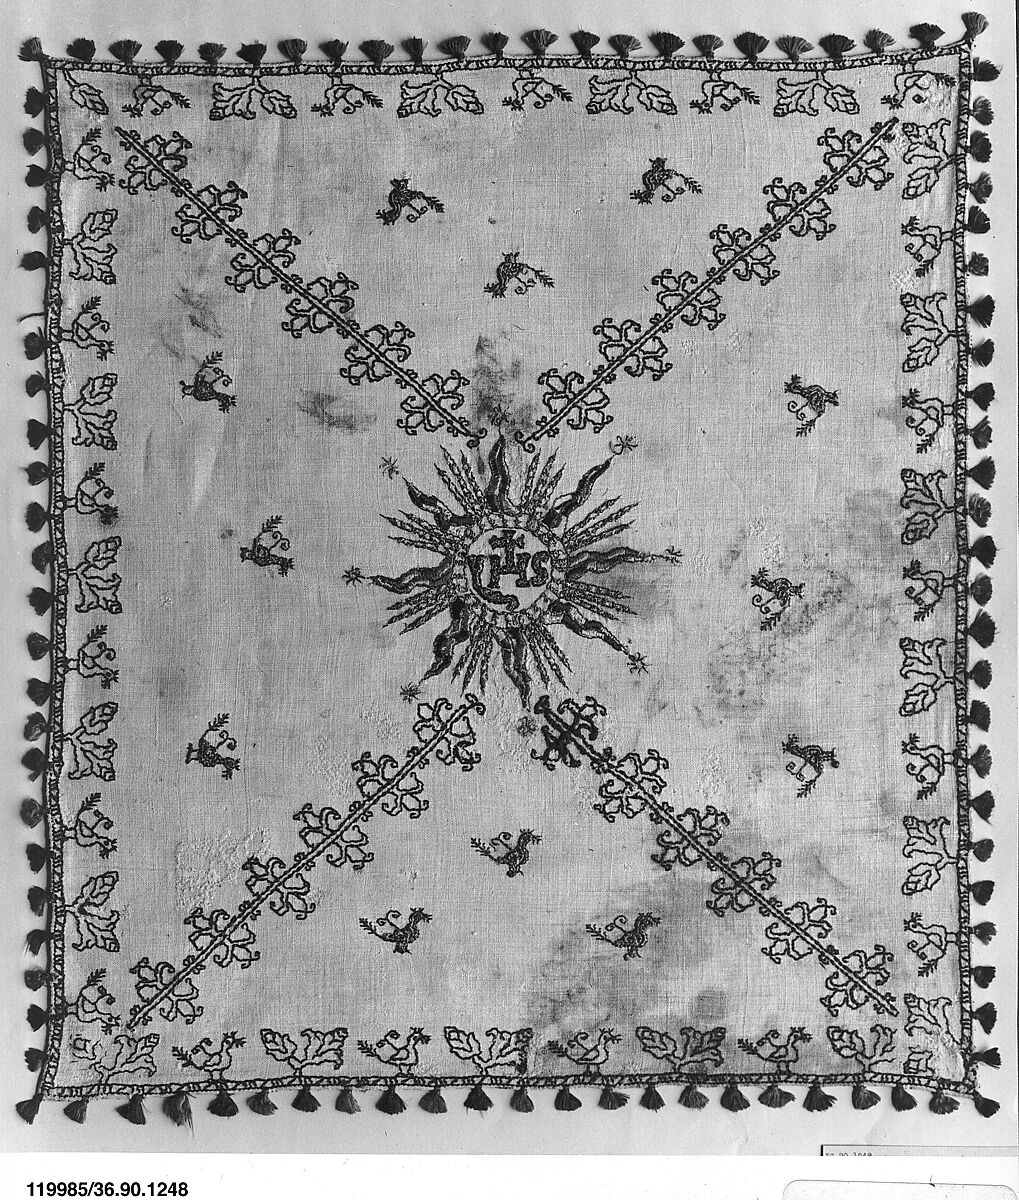 Christogram with a decorative border, Silk and metal-wrapped thread on linen, Italian 